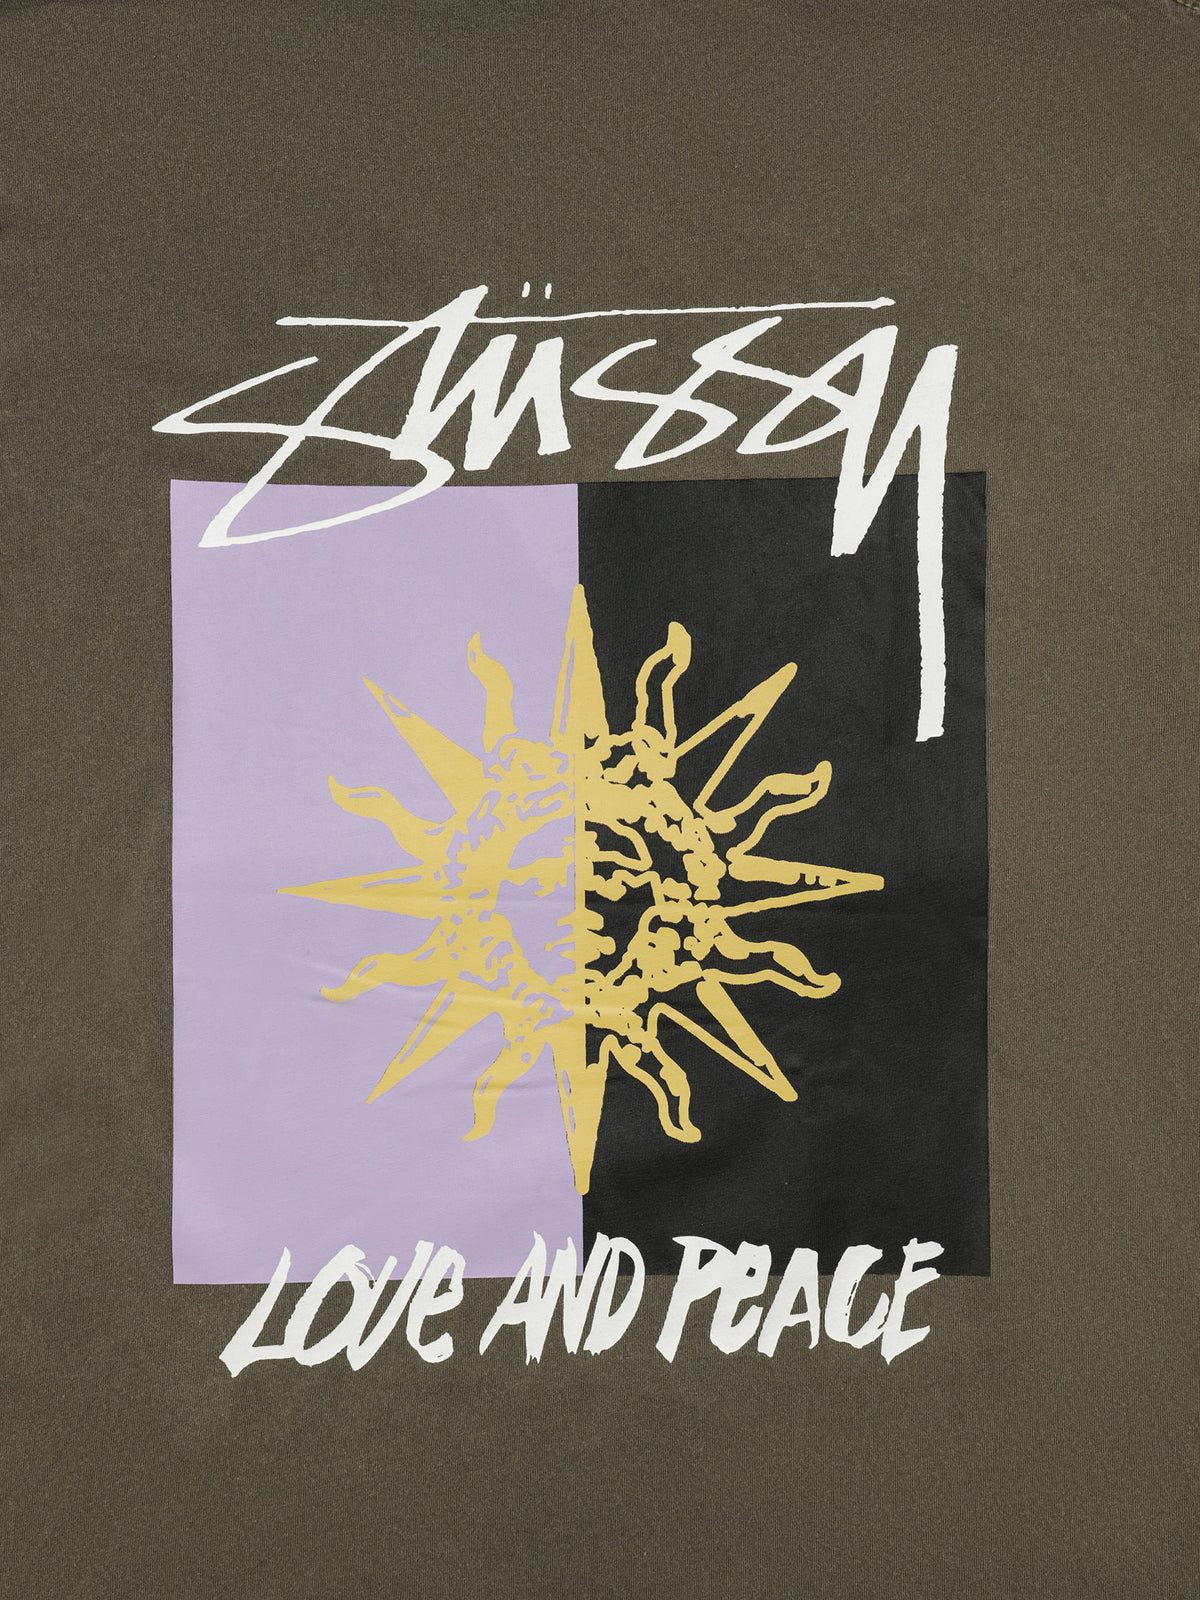 Sunsets Relaxed T-Shirt in Dusty Khaki